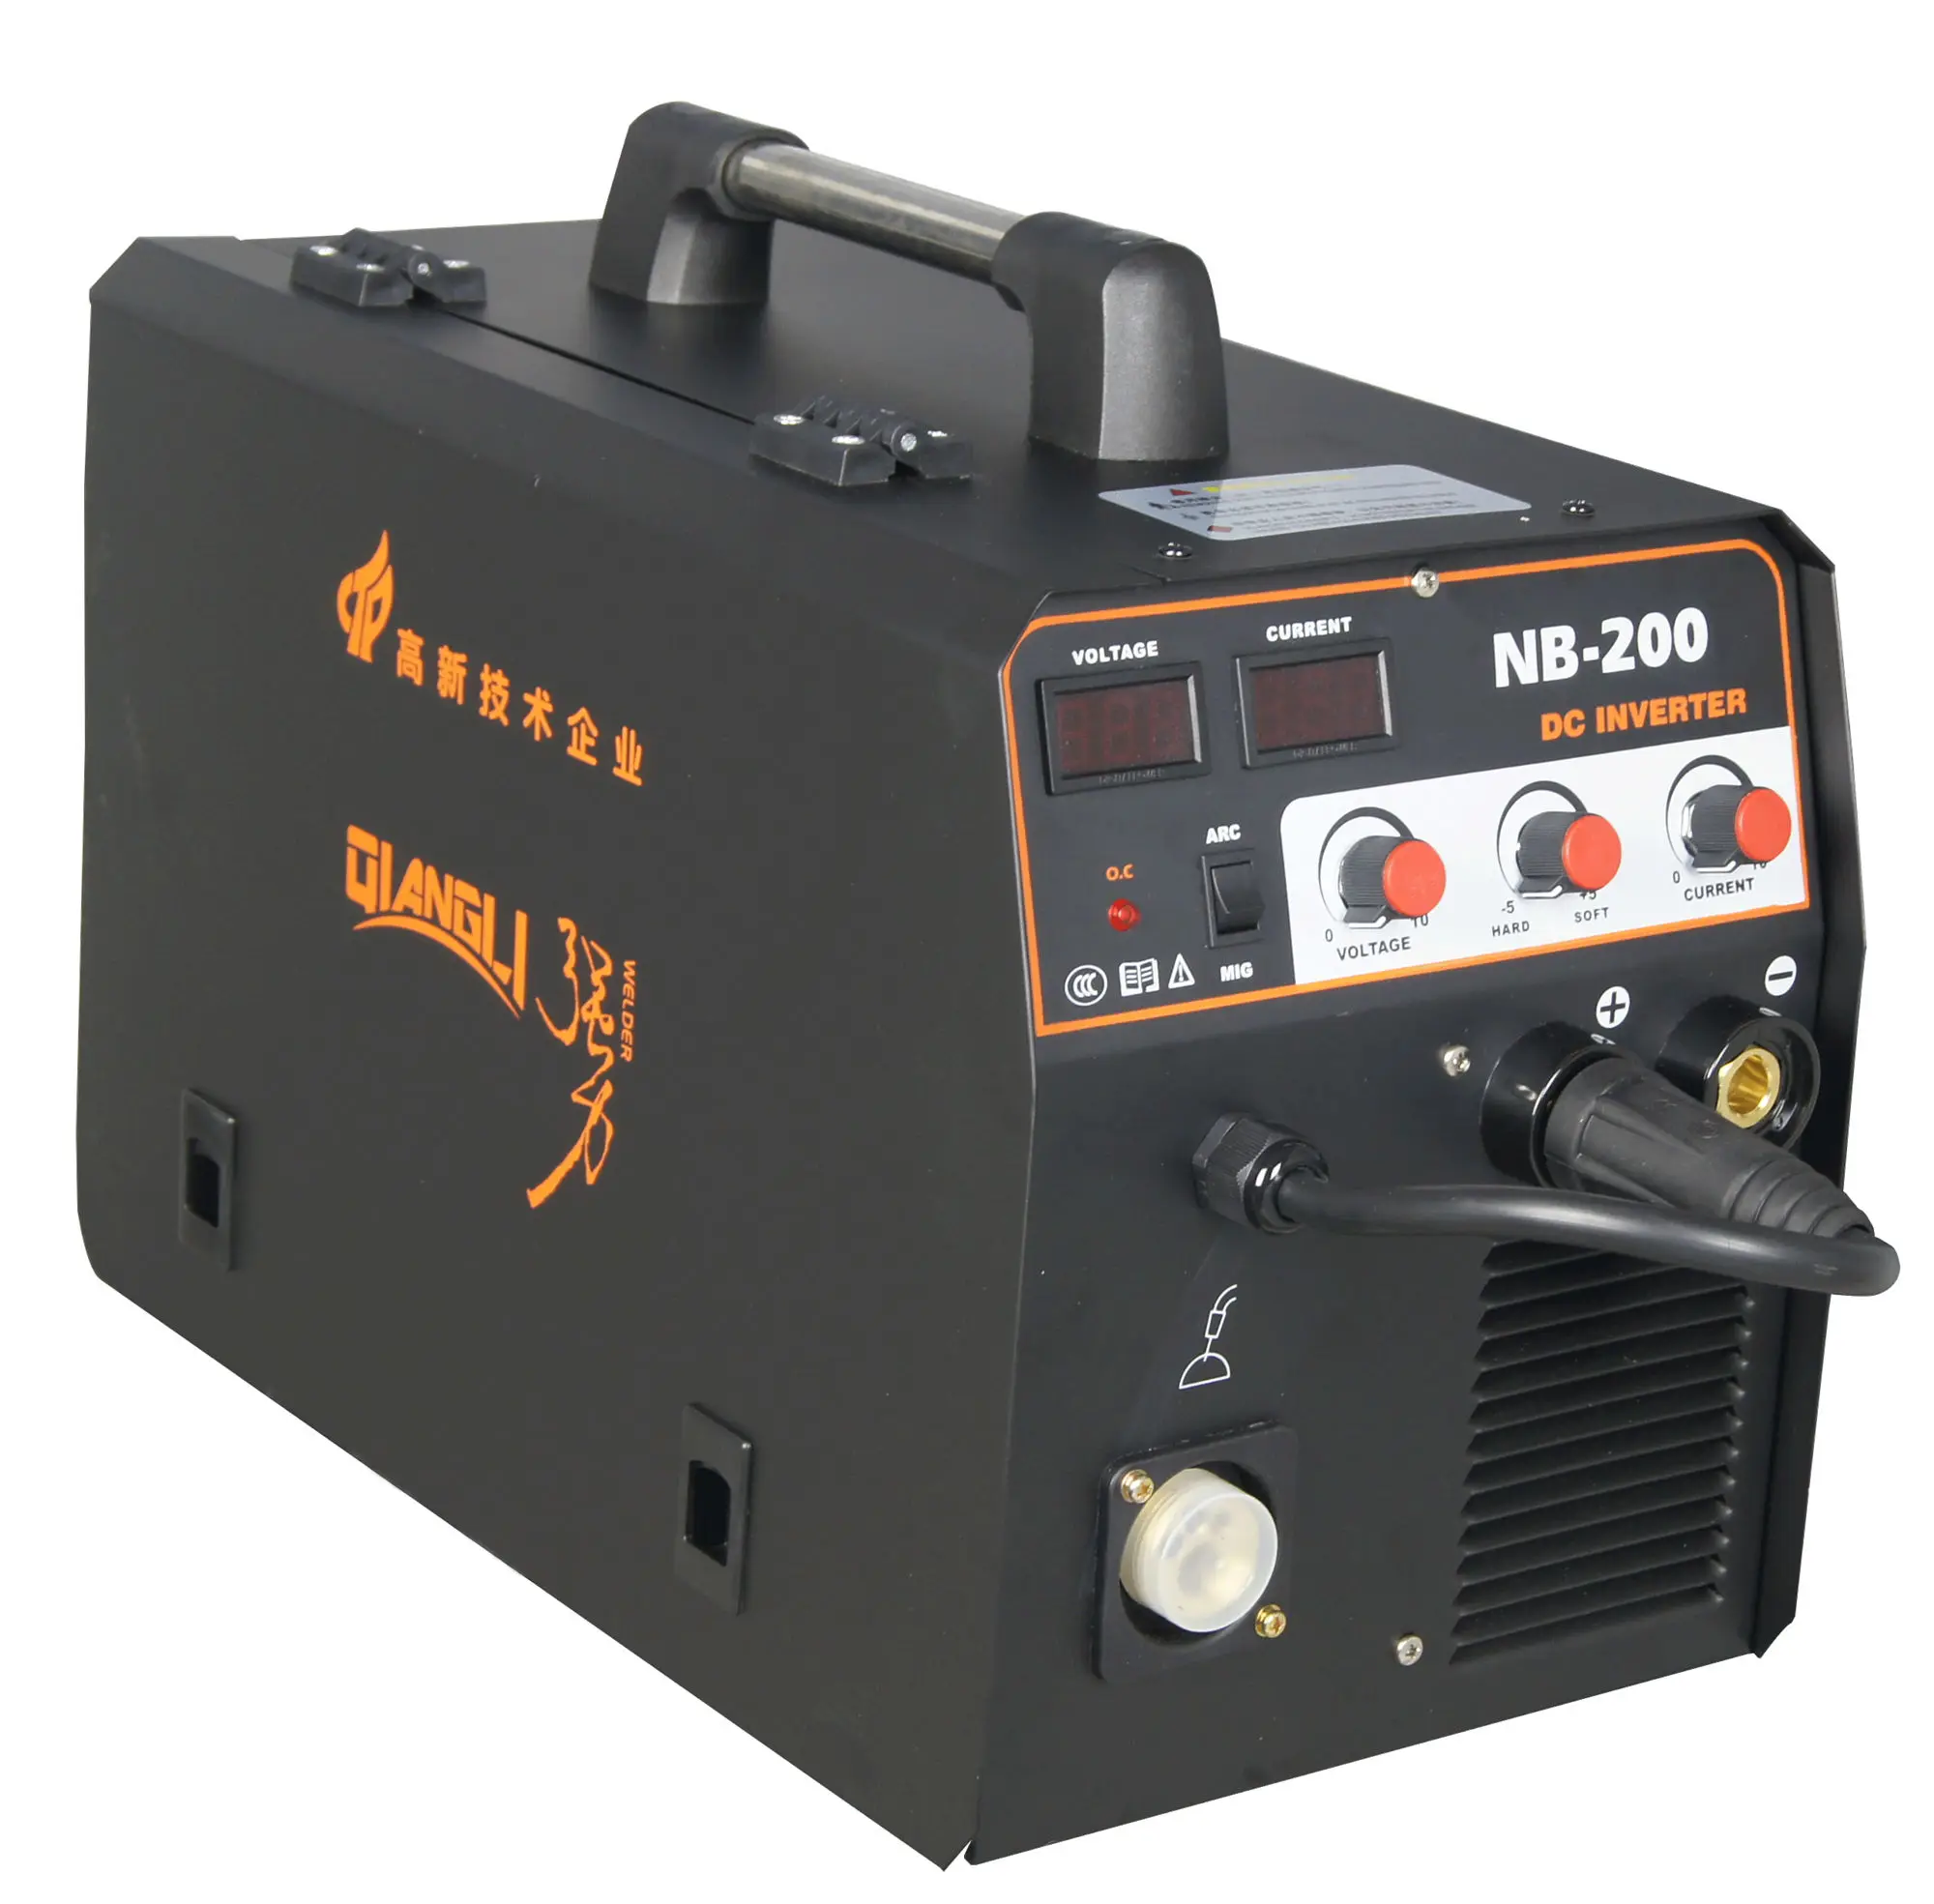 High frequency new technology inverter NBC MIG portable Factory Directly Supply Nb 200 Ac Dc Welder Aluminum Welding Machine (1600370613837)